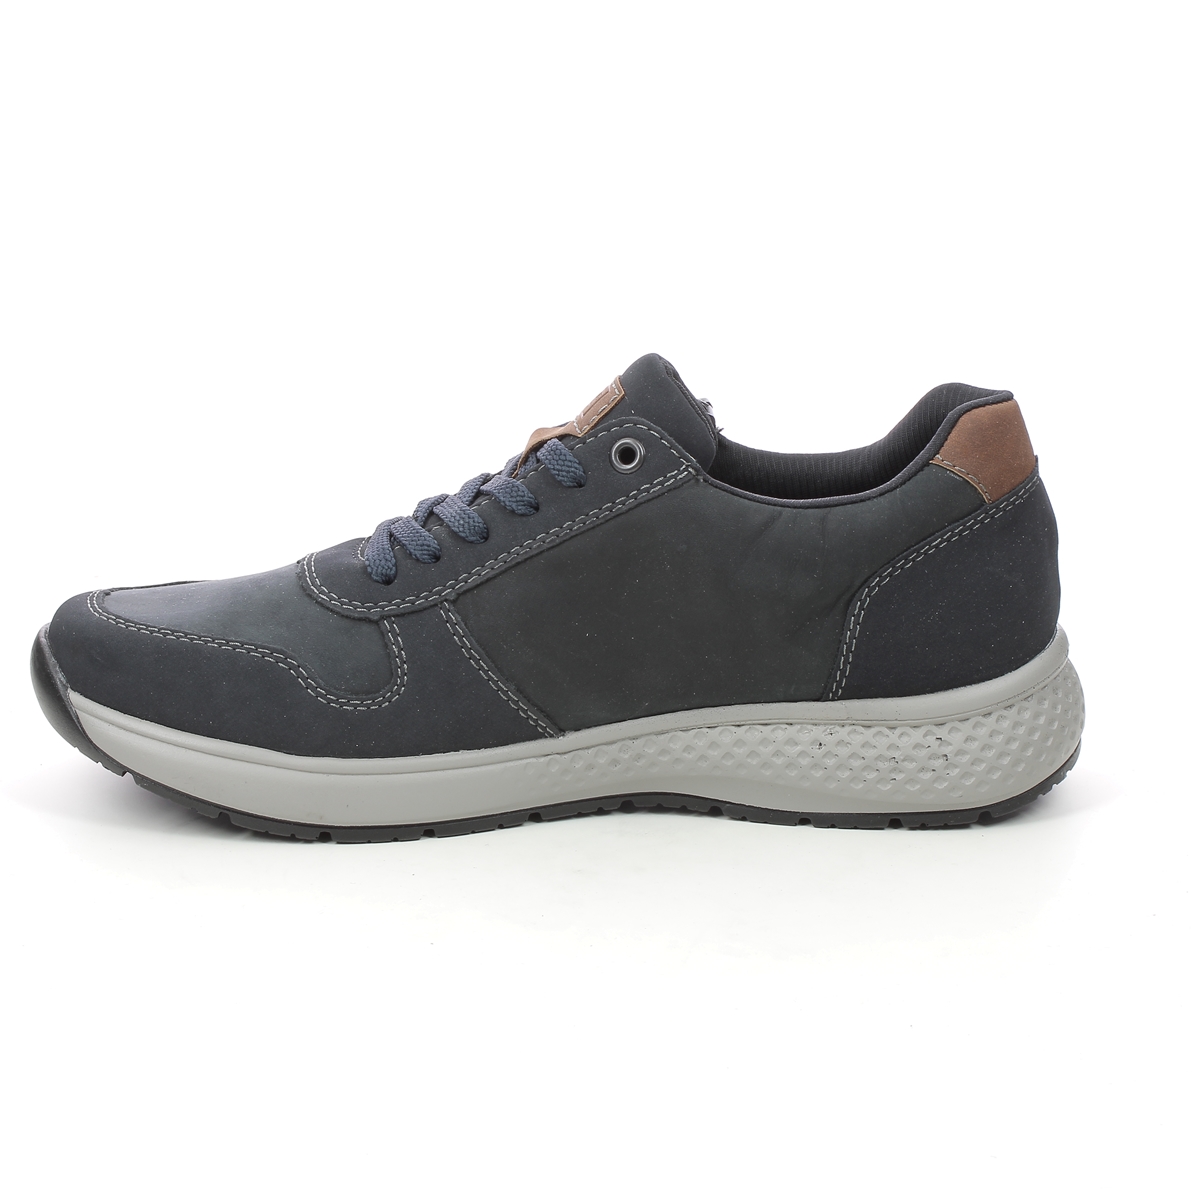 Rieker B7613-14 Navy leather Mens comfort shoes